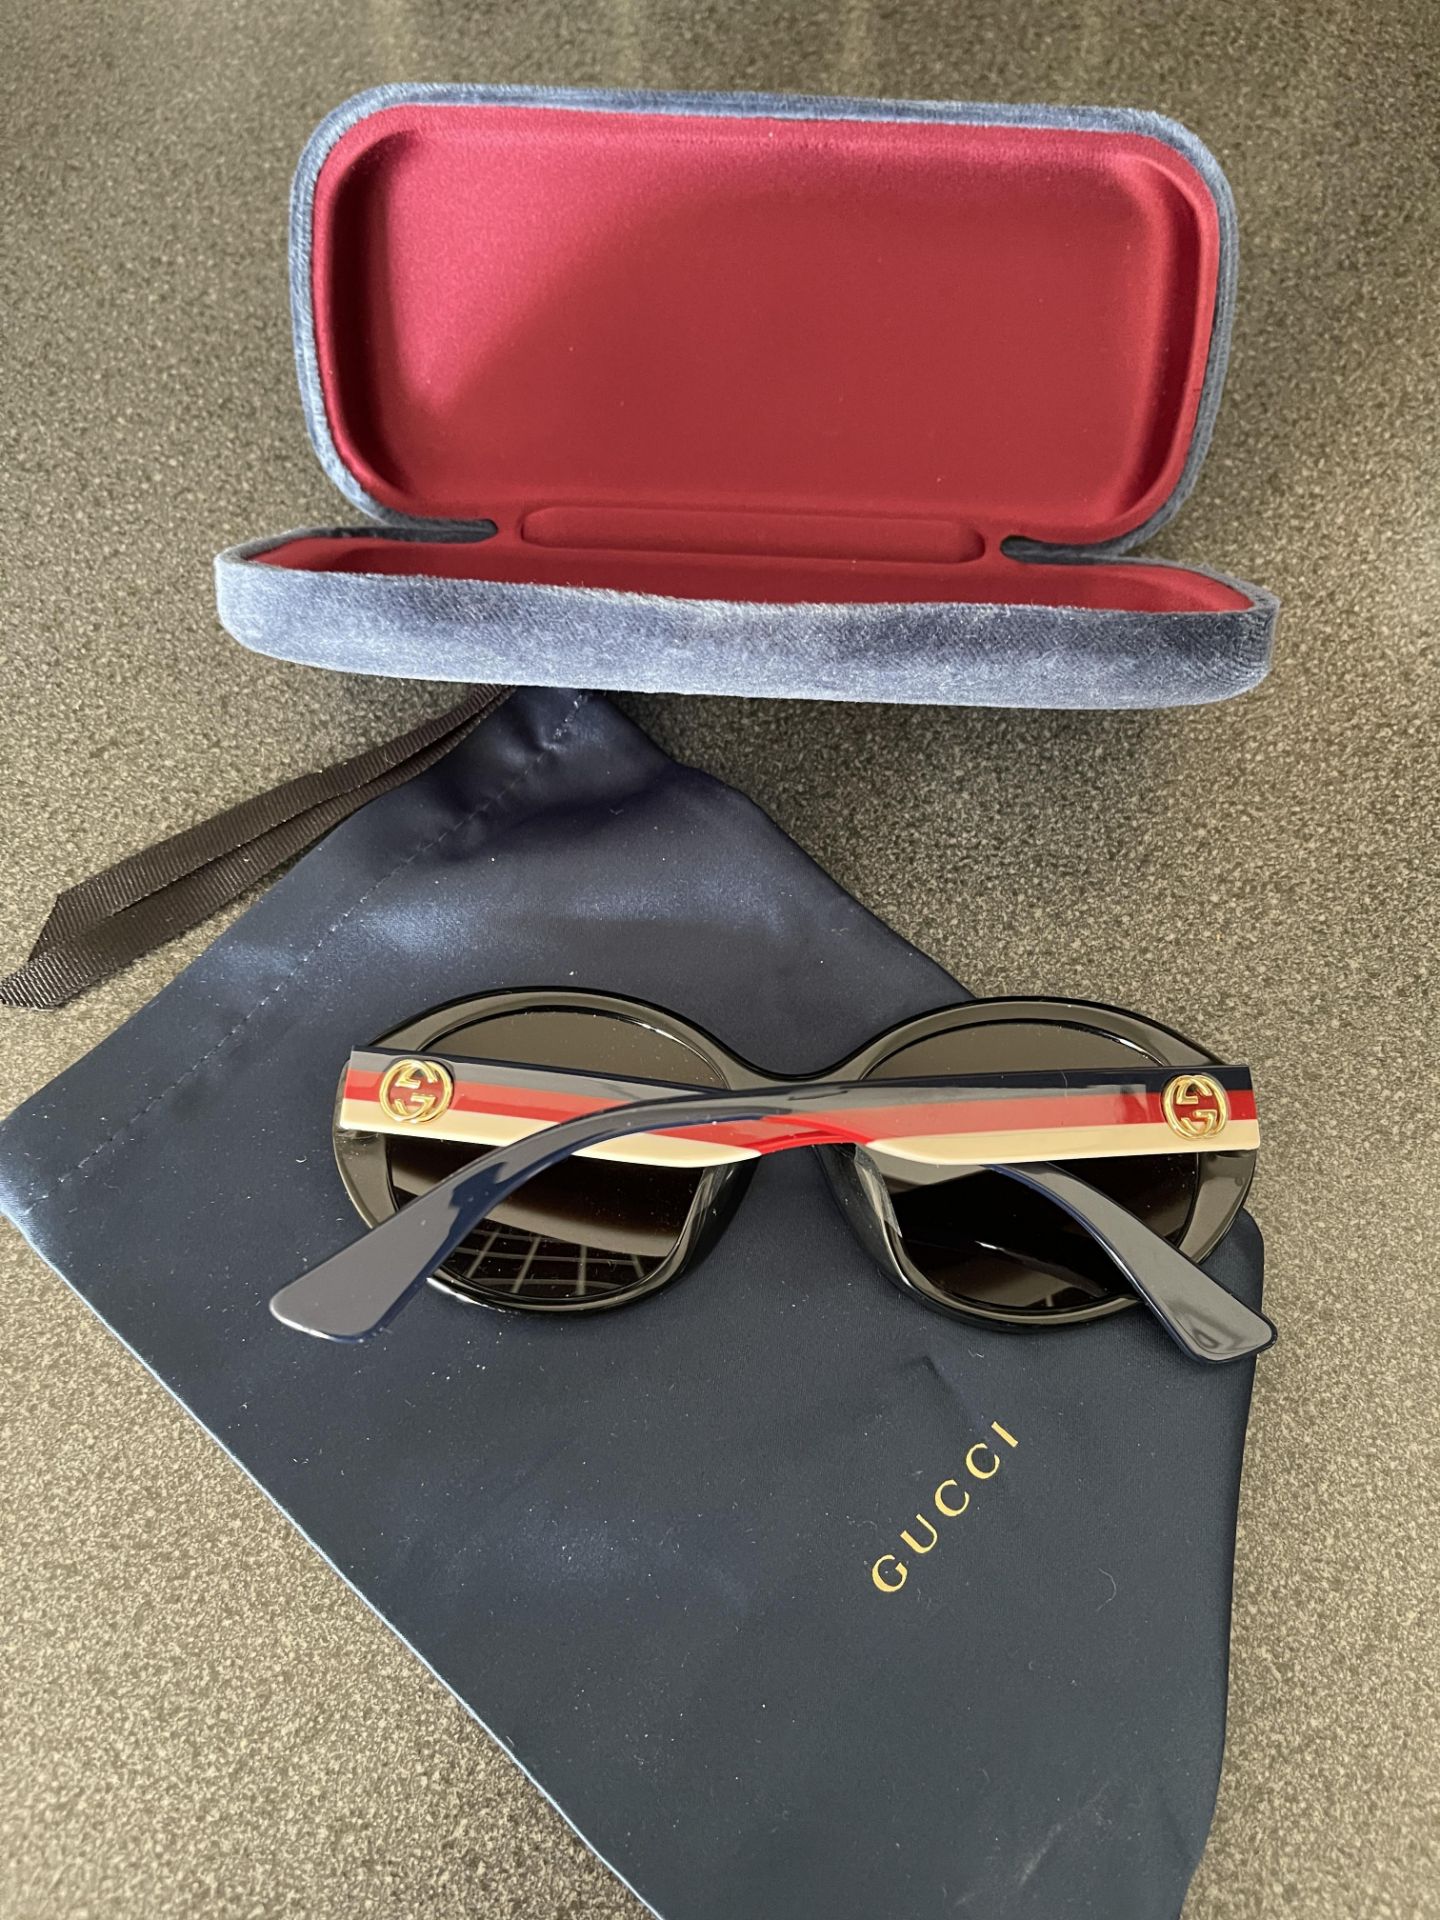 Gucci ladies sunglasses demon from a private jet charter. with case and cloth - Image 3 of 9